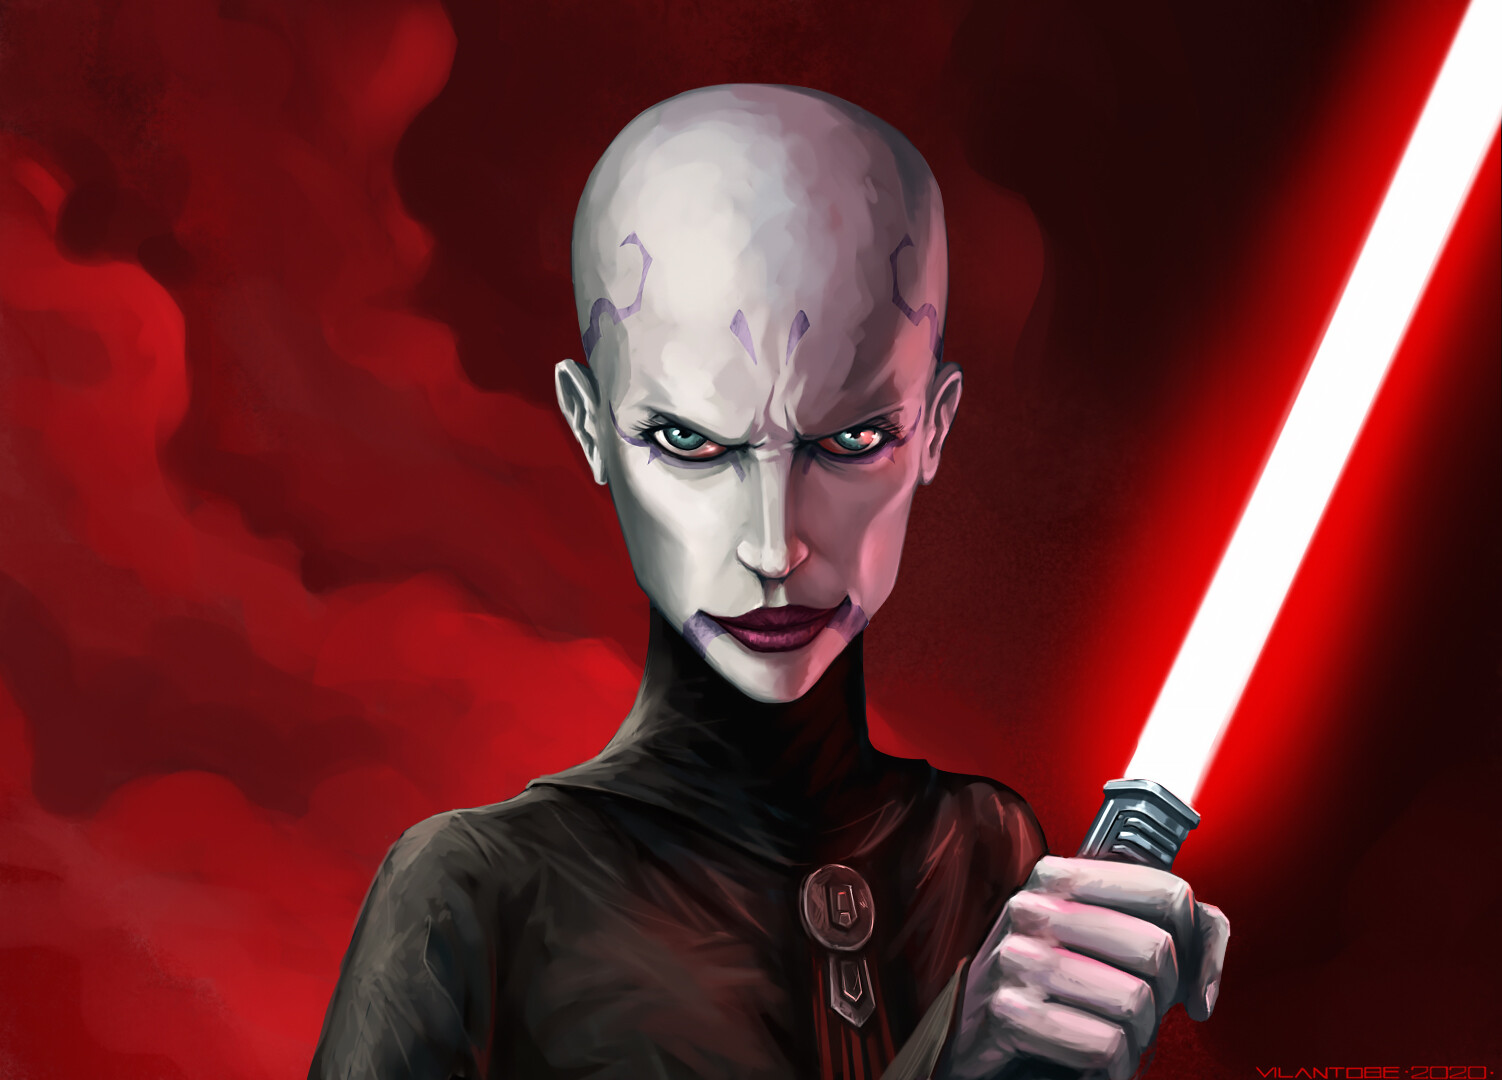 Quick draw practicing with one of favorite SW characters - Asajj Ventress -...